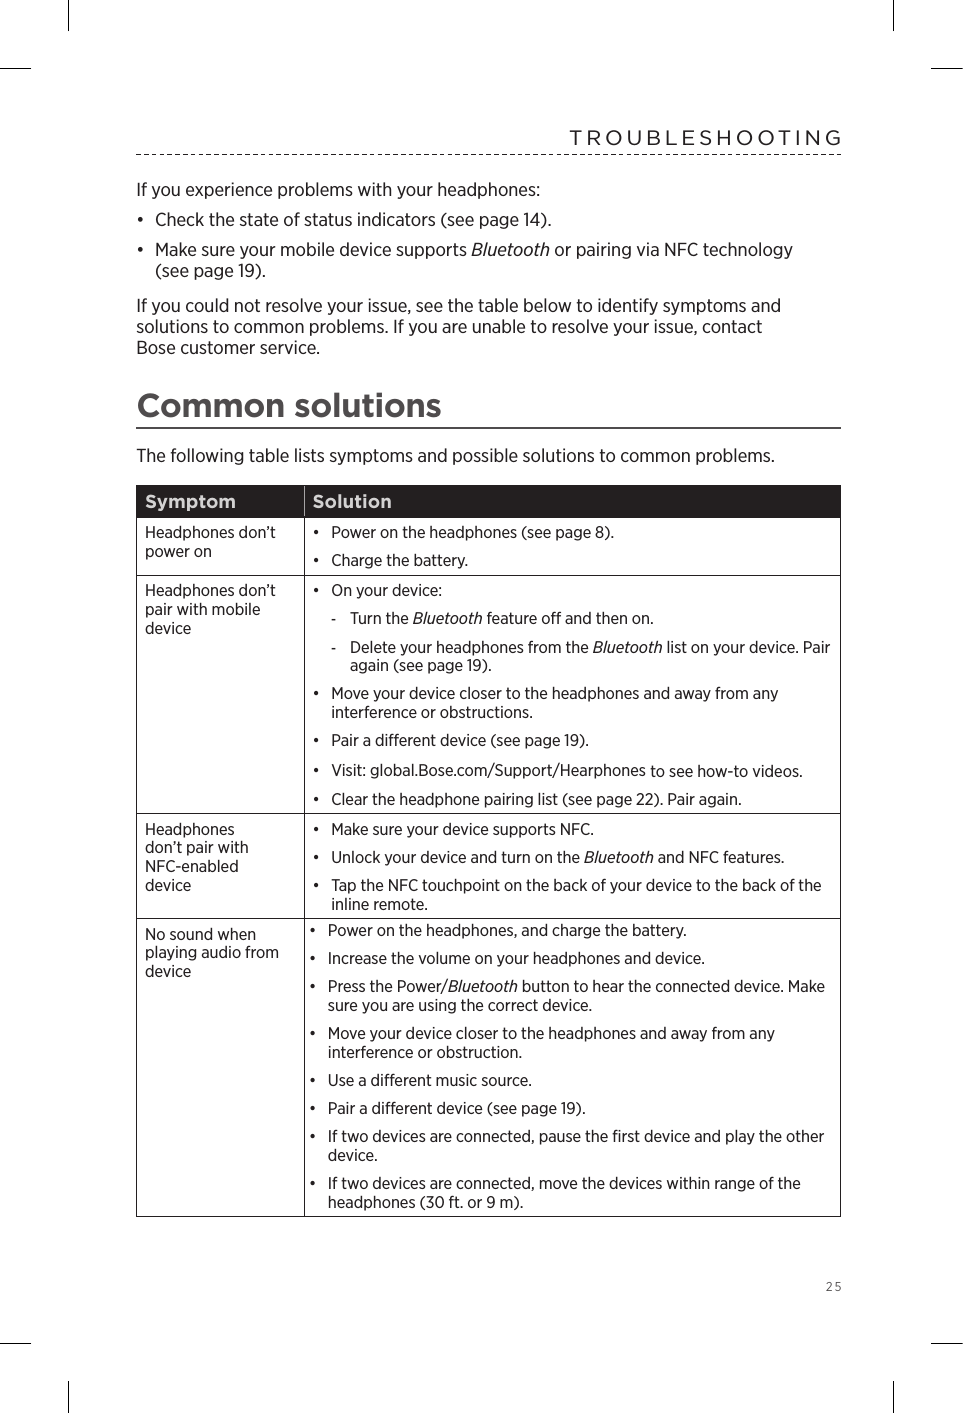  25TROUBLESHOOTINGIf you experience problems with your headphones: •  Check the state of status indicators (see page 14).•  Make sure your mobile device supports Bluetooth or pairing via NFC technology  (see page 19).If you could not resolve your issue, see the table below to identify symptoms and  solutions to common problems. If you are unable to resolve your issue, contact  Bose customer service.Common solutionsThe following table lists symptoms and possible solutions to common problems.Symptom SolutionHeadphones don’t power on•  Power on the headphones (see page 8). •  Charge the battery.Headphones don’t pair with mobile device•  On your device: -Turn the Bluetooth feature o and then on. -Delete your headphones from the Bluetooth list on your device. Pair again (see page 19).•  Move your device closer to the headphones and away from any  interference or obstructions.•  Pair a dierent device (see page 19).•  Visit: global.Bose.com/Support/Hearphones to see how-to videos.•  Clear the headphone pairing list (see page 22). Pair again.Headphones  don’t pair with NFC-enabled  device•  Make sure your device supports NFC.•  Unlock your device and turn on the Bluetooth and NFC  features.•  Tap the NFC touchpoint on the back of your device to the back of the inline remote.No sound when playing audio from device•  Power on the headphones, and charge the battery.•  Increase the volume on your headphones and device.•  Press the Power/Bluetooth button to hear the  connected device. Make sure you are using the correct device.•  Move your device closer to the headphones and away from any  interference or obstruction.•  Use a dierent music source.•  Pair a dierent device (see page 19).•  If two devices are connected, pause the ﬁrst device and play the other device.•  If two devices are connected, move the devices within range of the headphones (30 ft. or 9 m). 